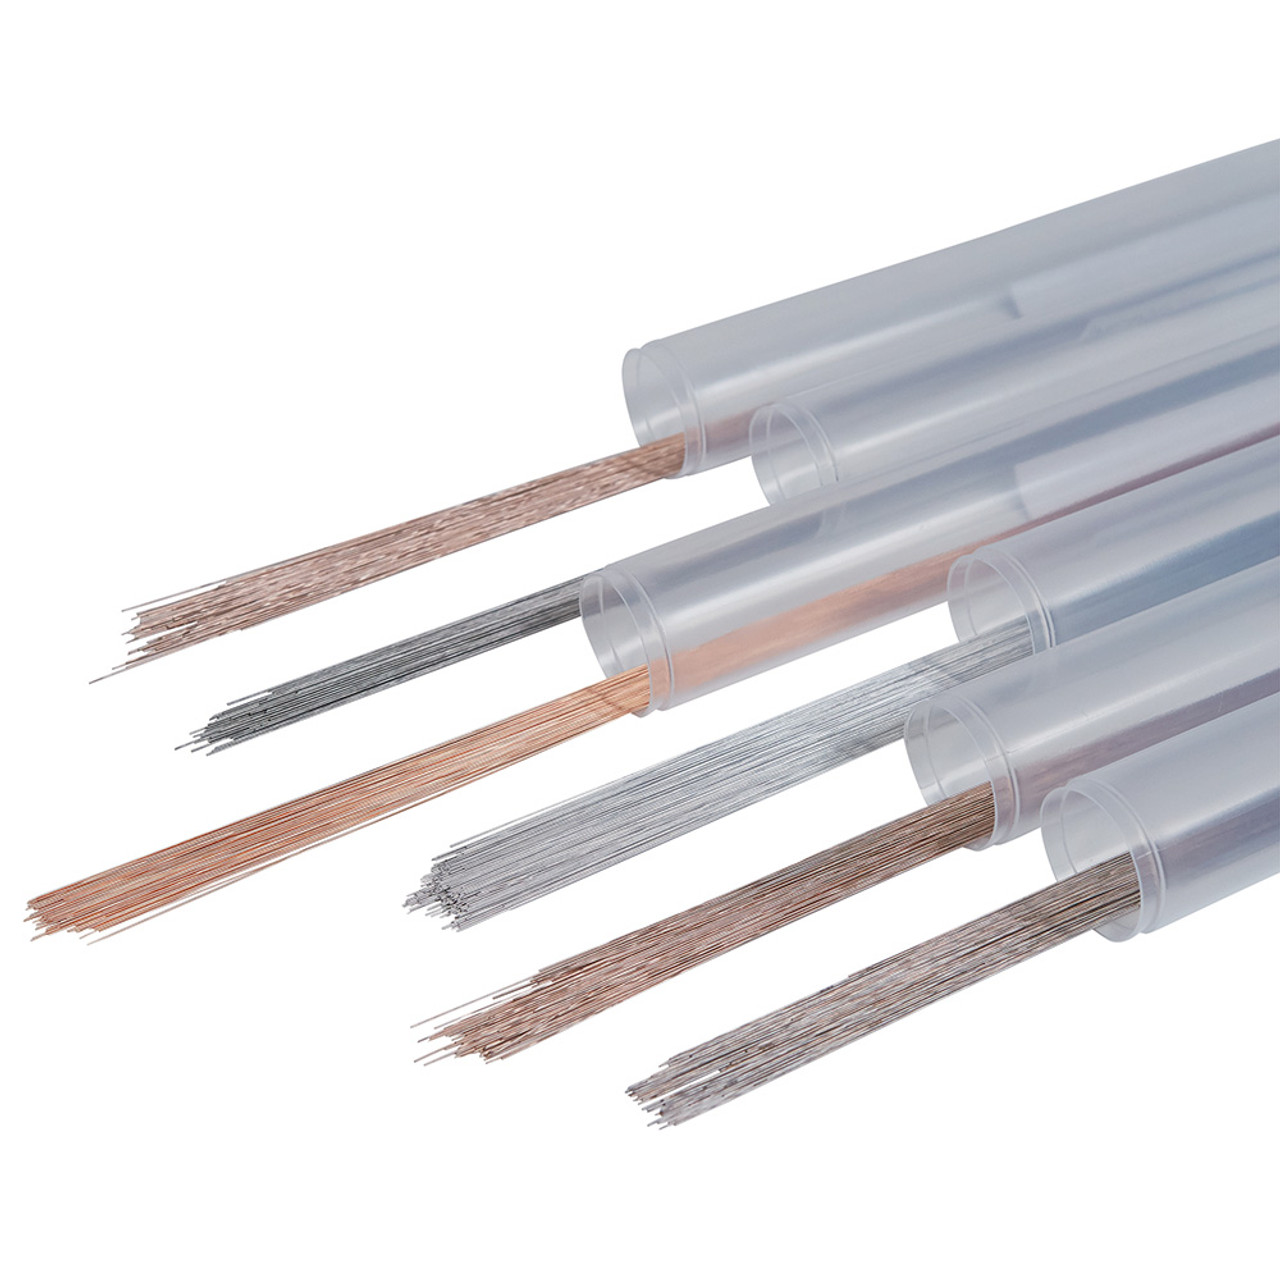 Laser Welding Wires - M-2, 0.2mm pkg. of 25 grams = approx. 318 wires